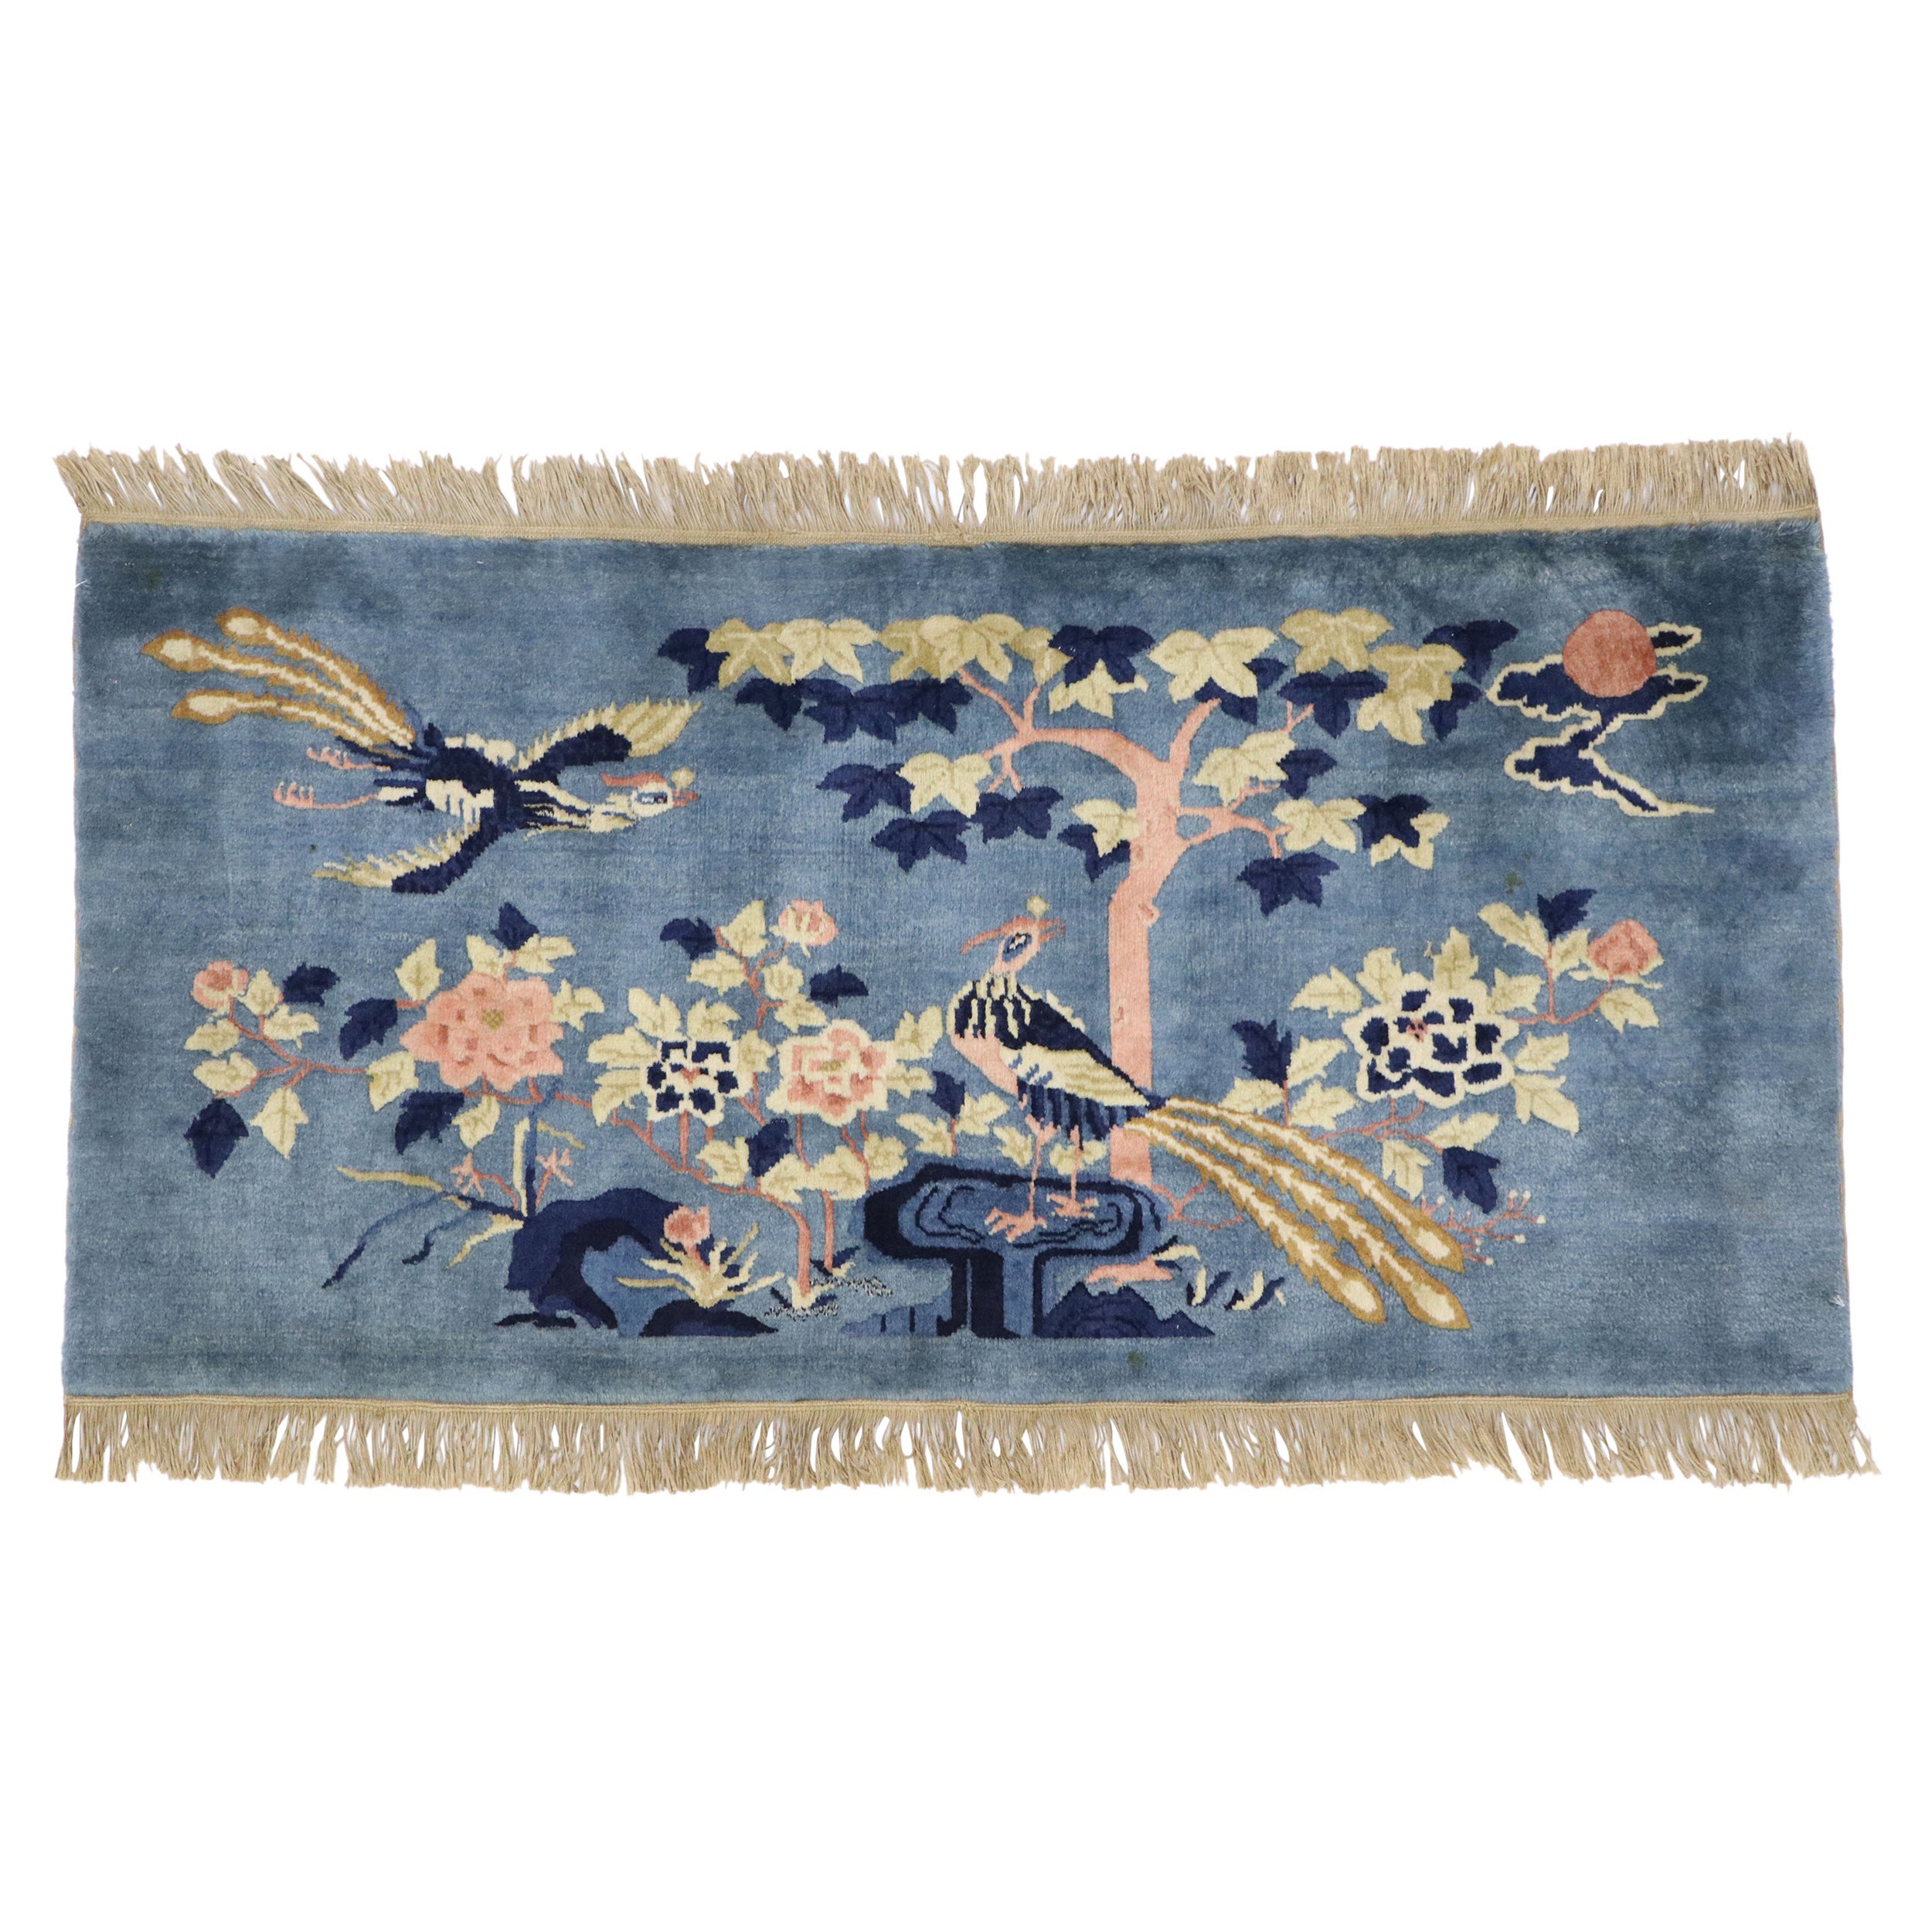 Antique Chinese Art Deco Pictorial Rug with Chinoiserie Chic Style For Sale